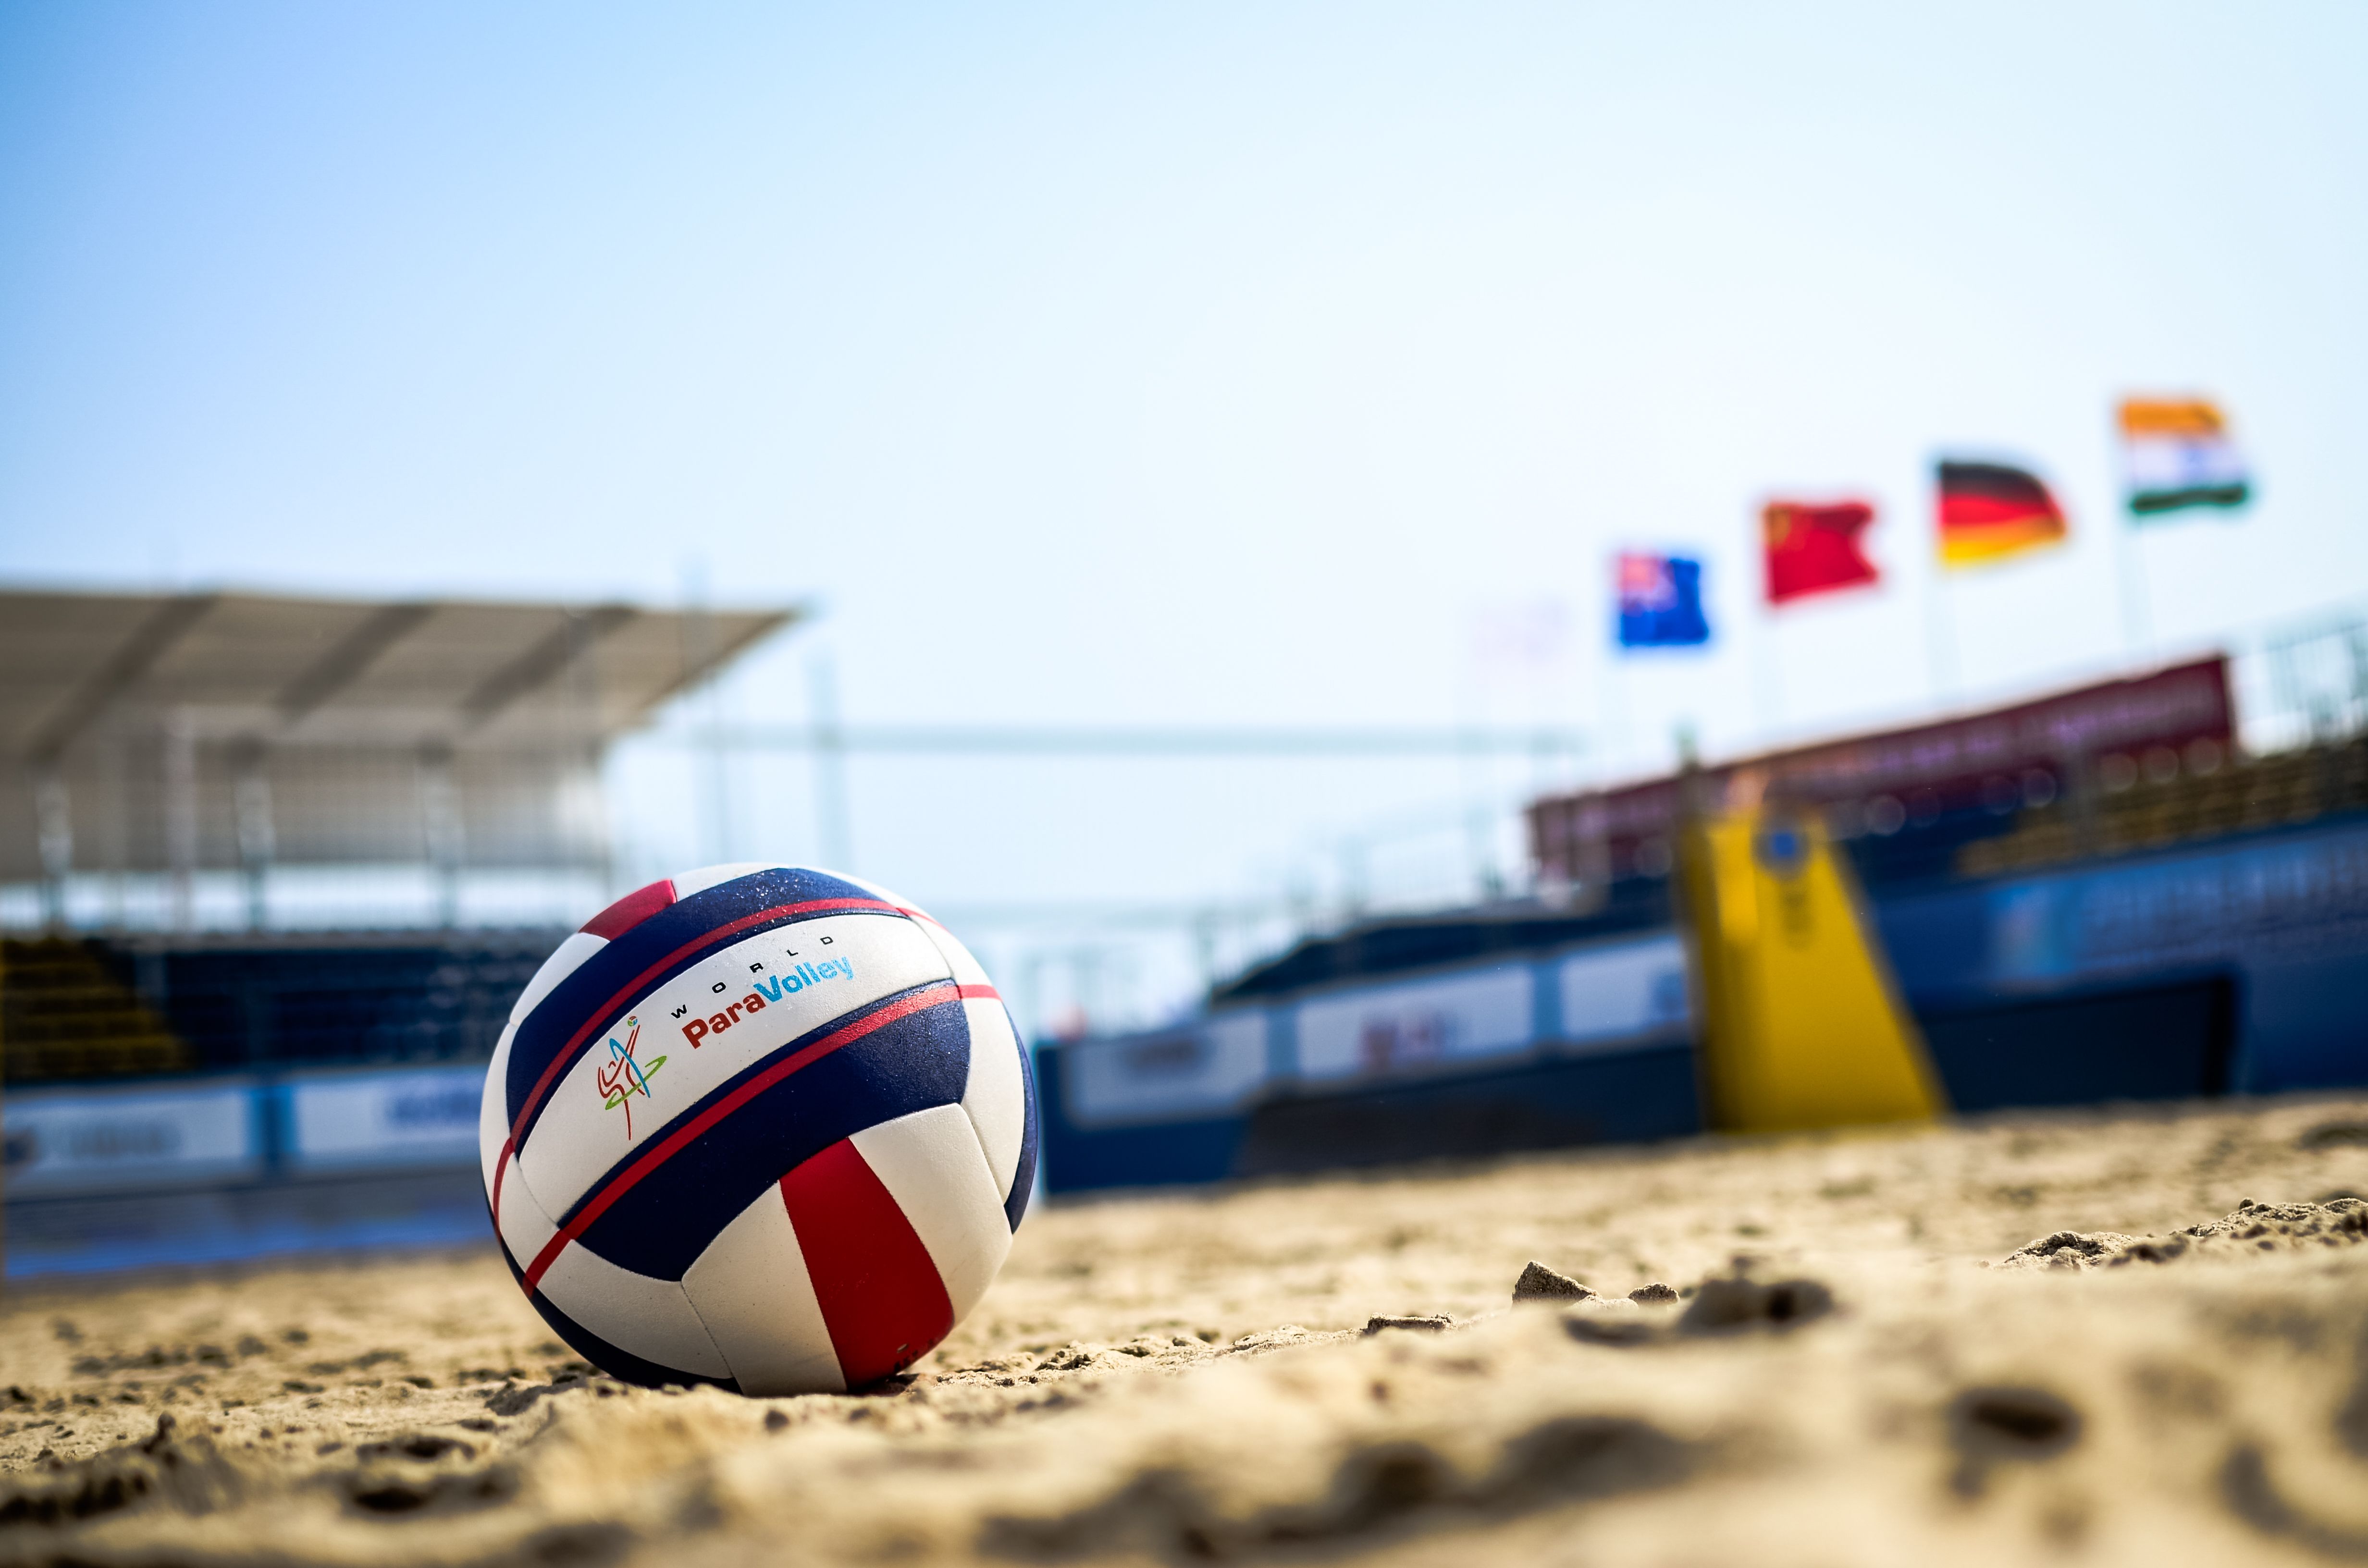 A volleyball on the sand with flags in the background. - Volleyball